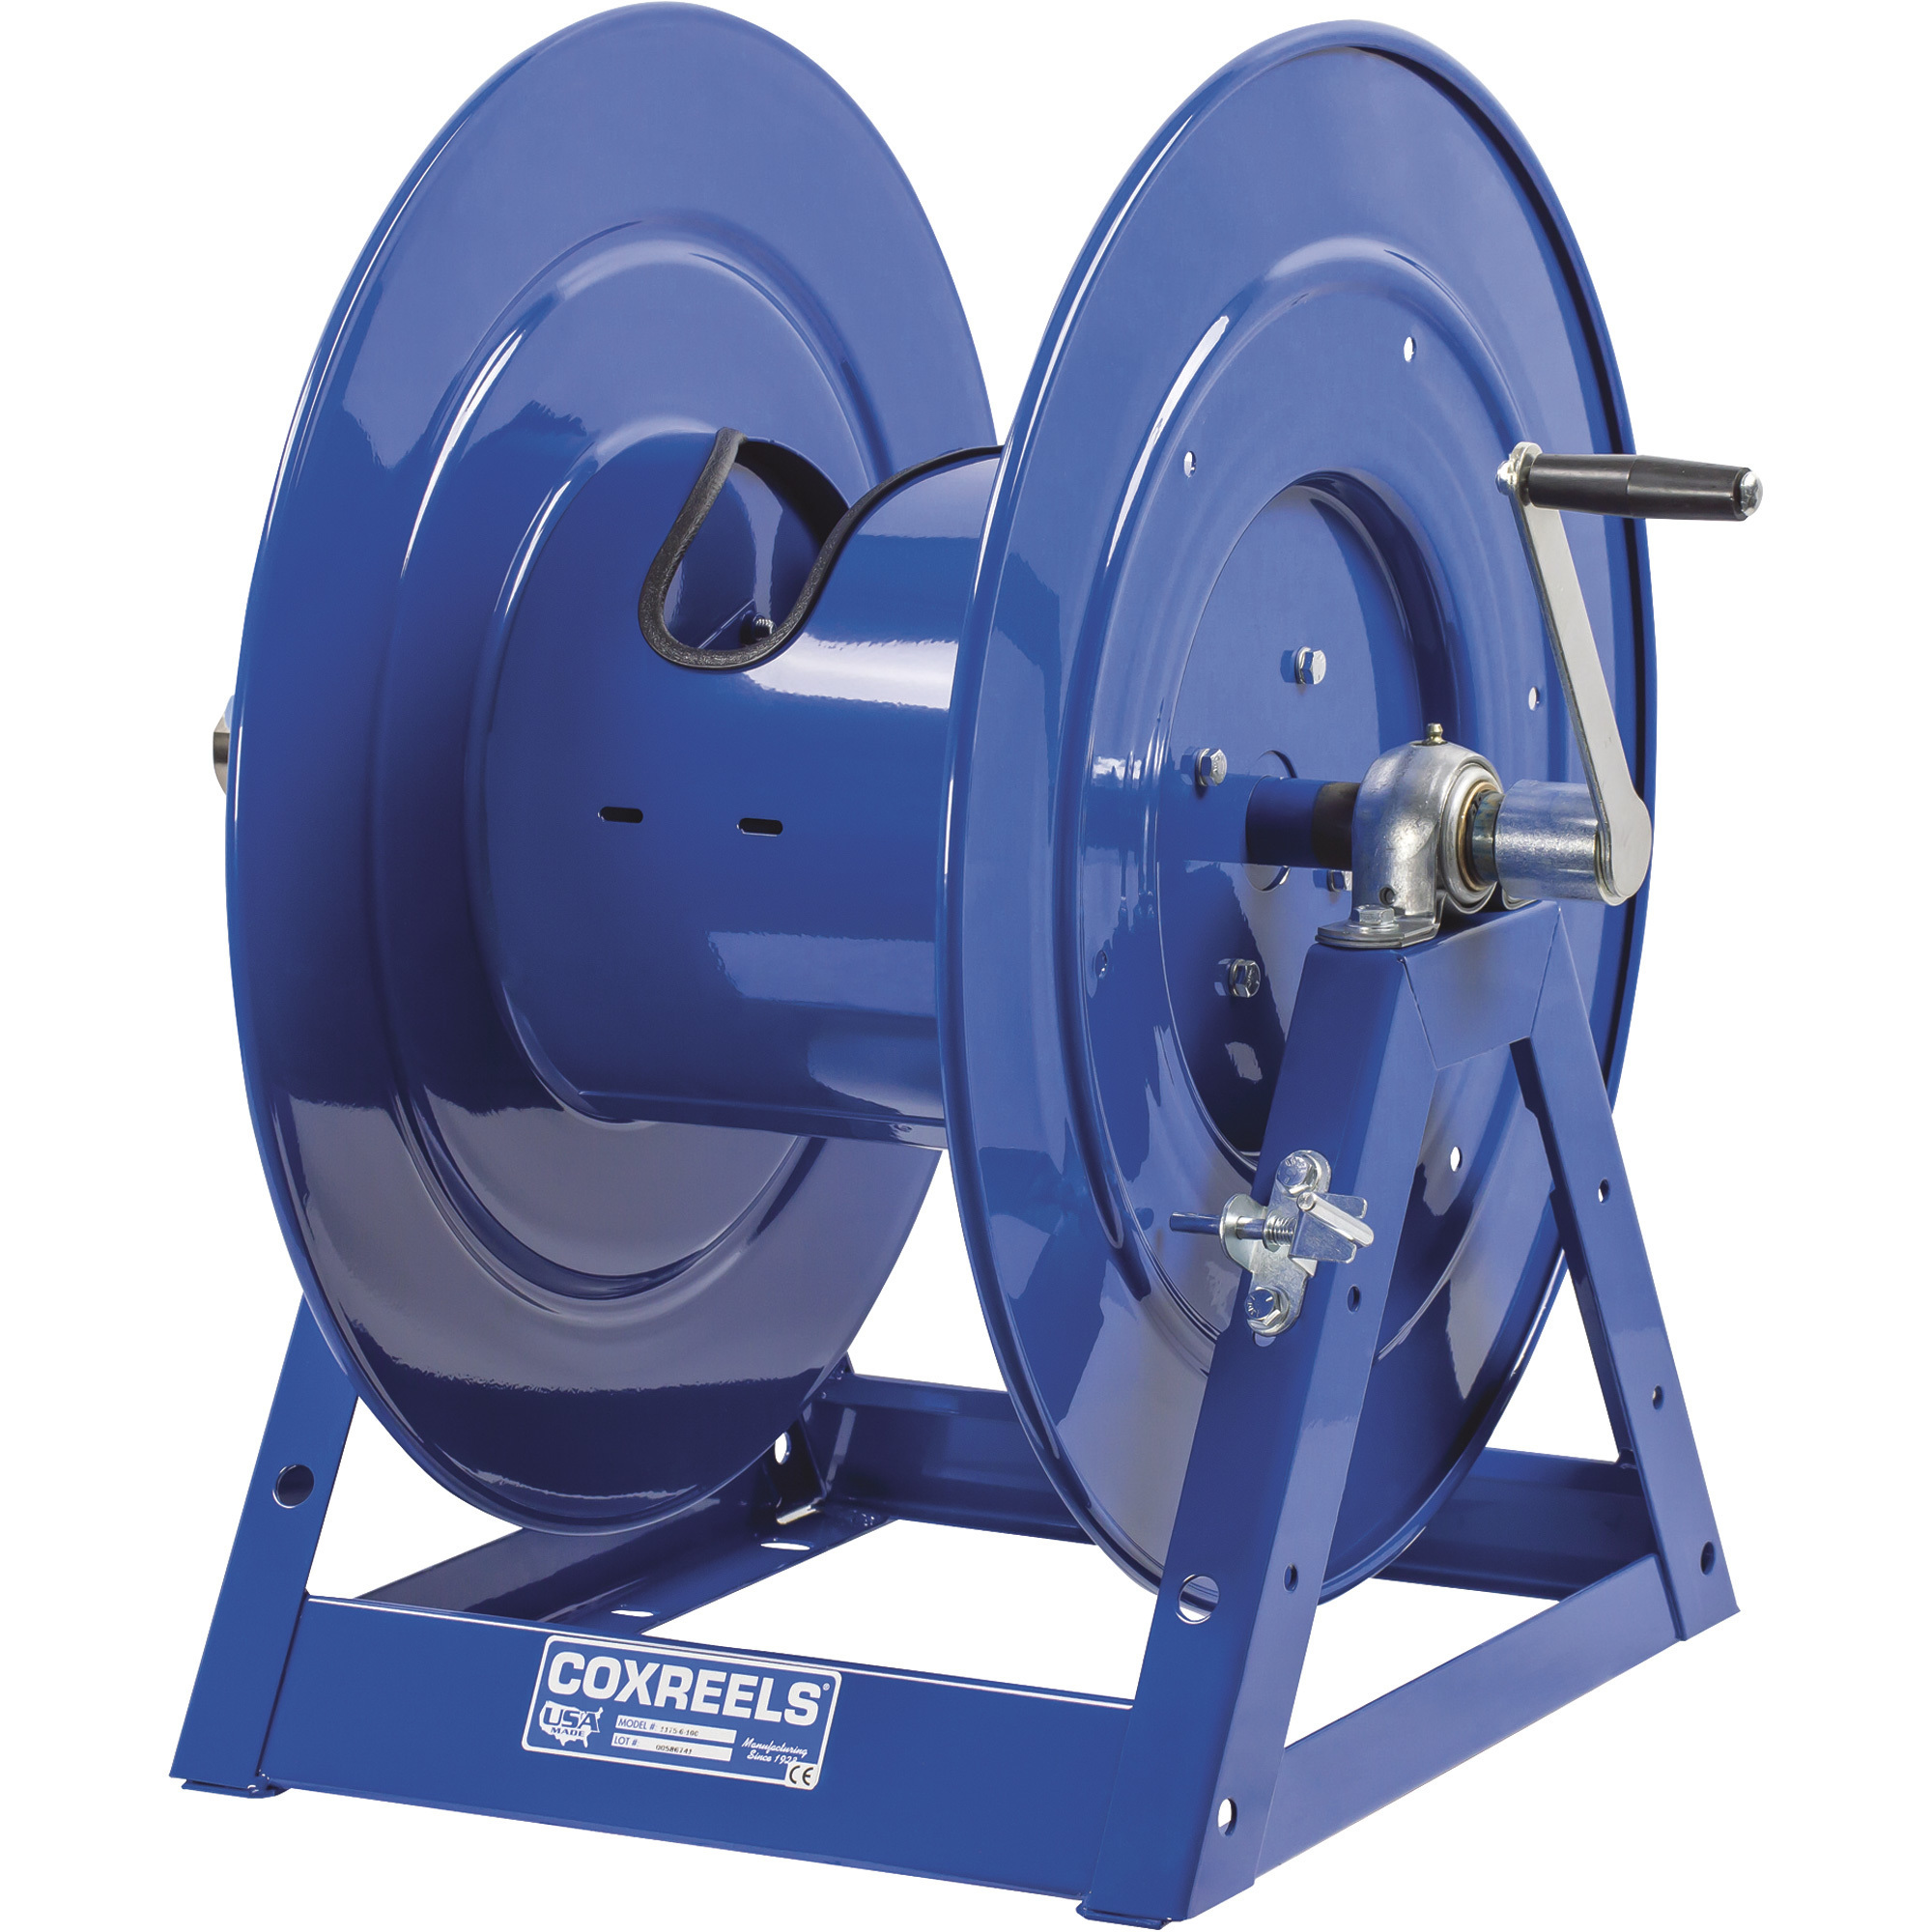 Coxreels 1175 Series Hand-Crank Hose Reel, Holds 1Inch x 200ft. Hose, Max. 3000 PSI, Model 1175-6-200